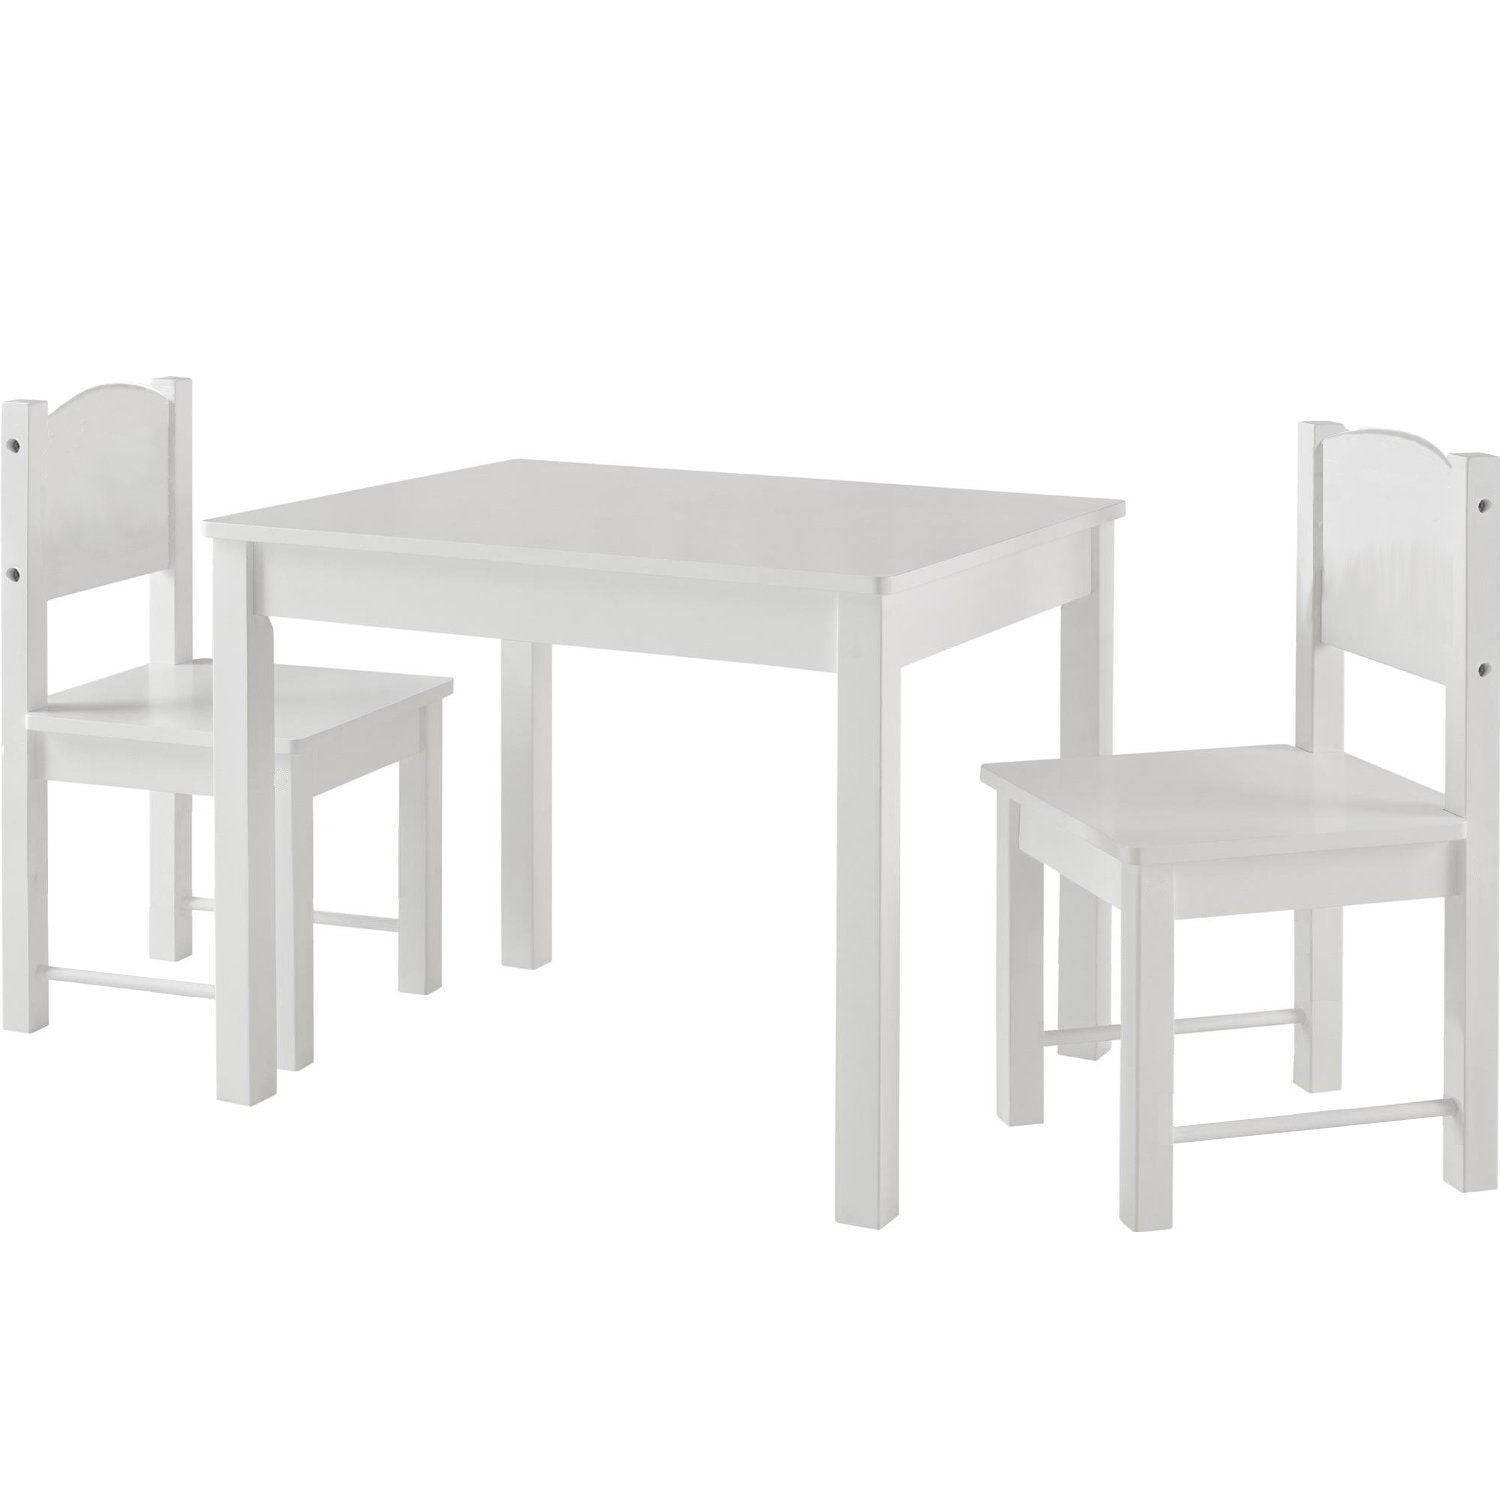 Kids Wooden White Table Desk And Chair Set For Study Home Work Writing Reading